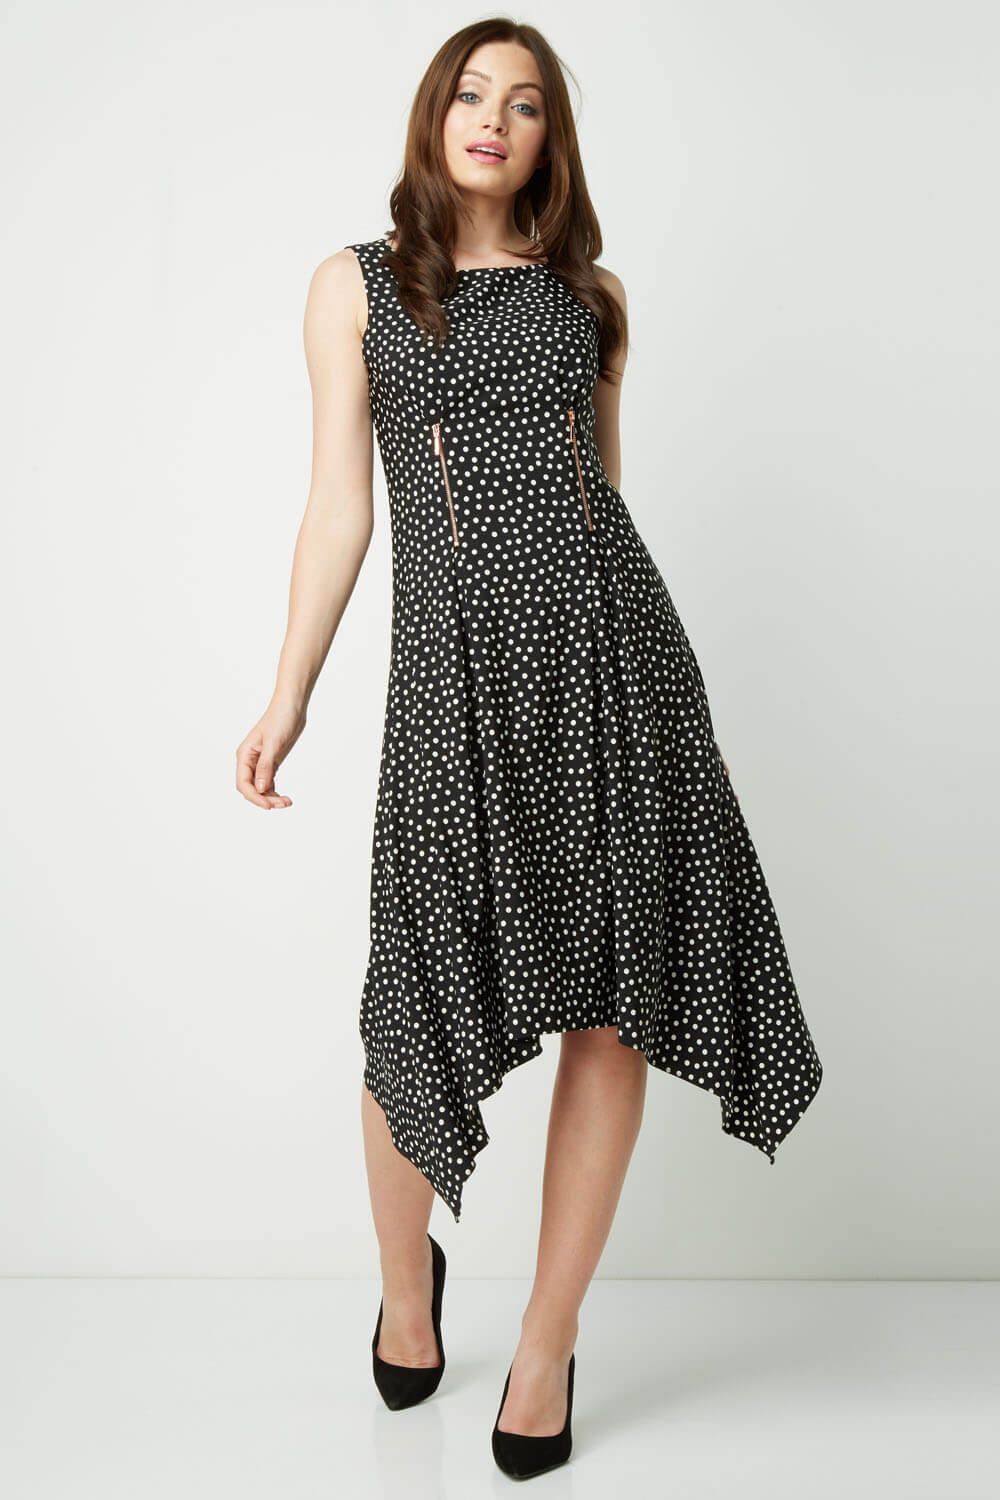 Black Zip Detail Fit and Flare Spot Dress, Image 2 of 4